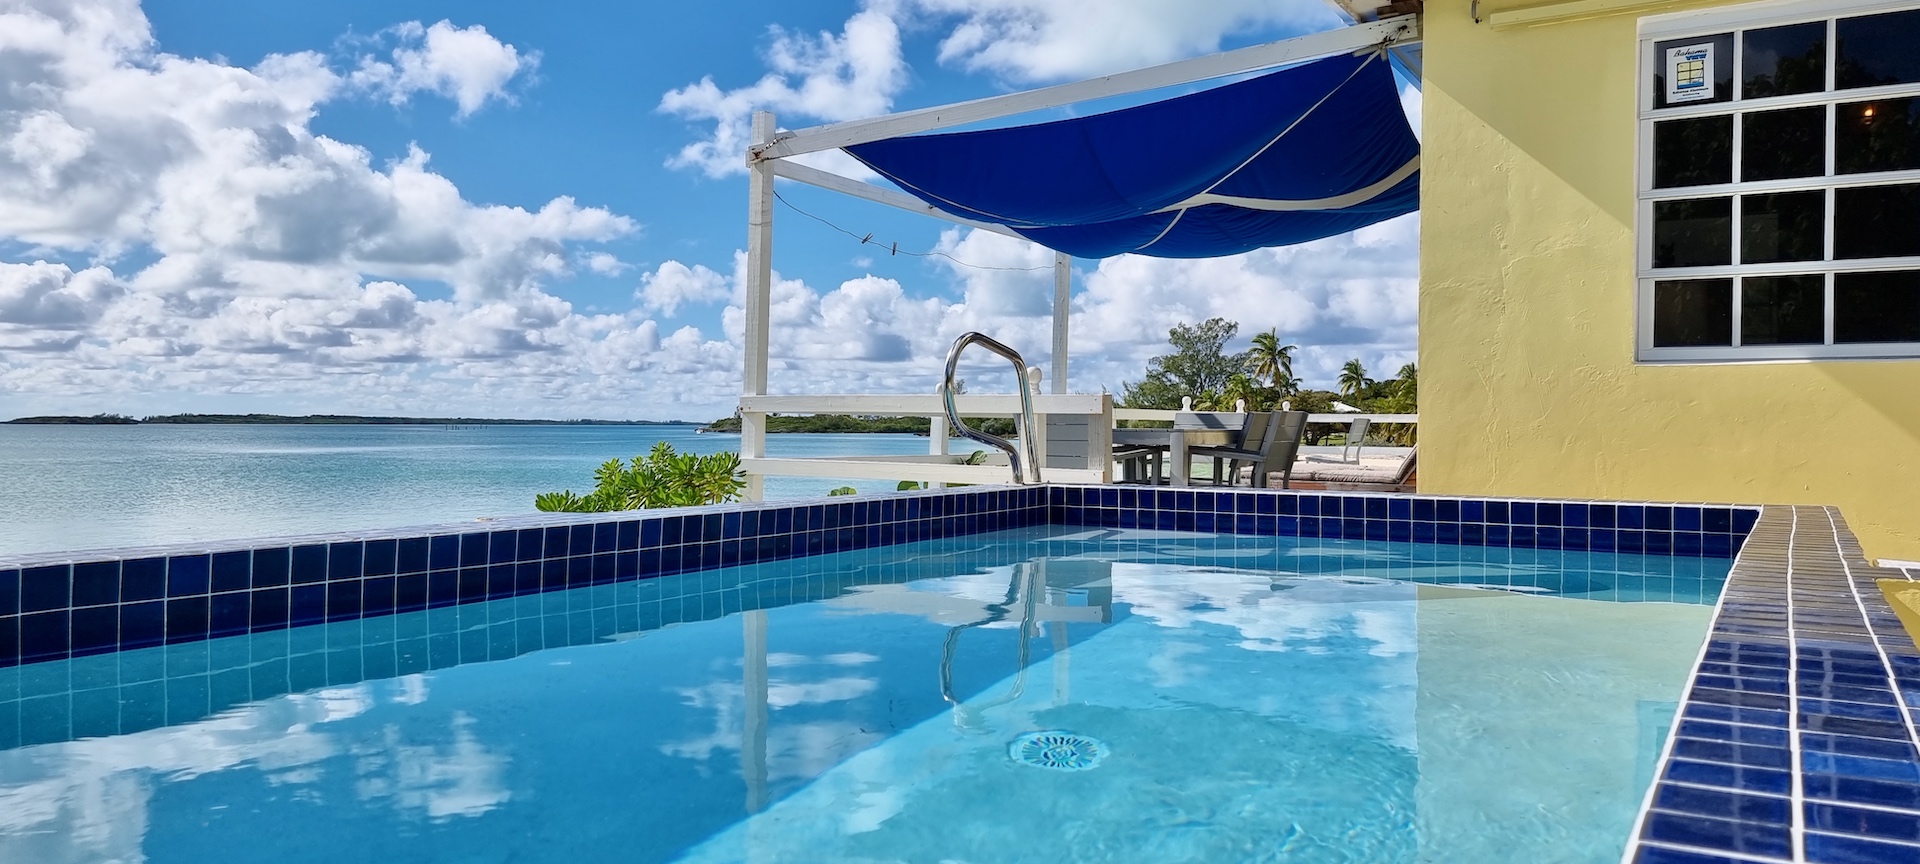 waterfront-investment-acreage-russell-island-bahamas-13